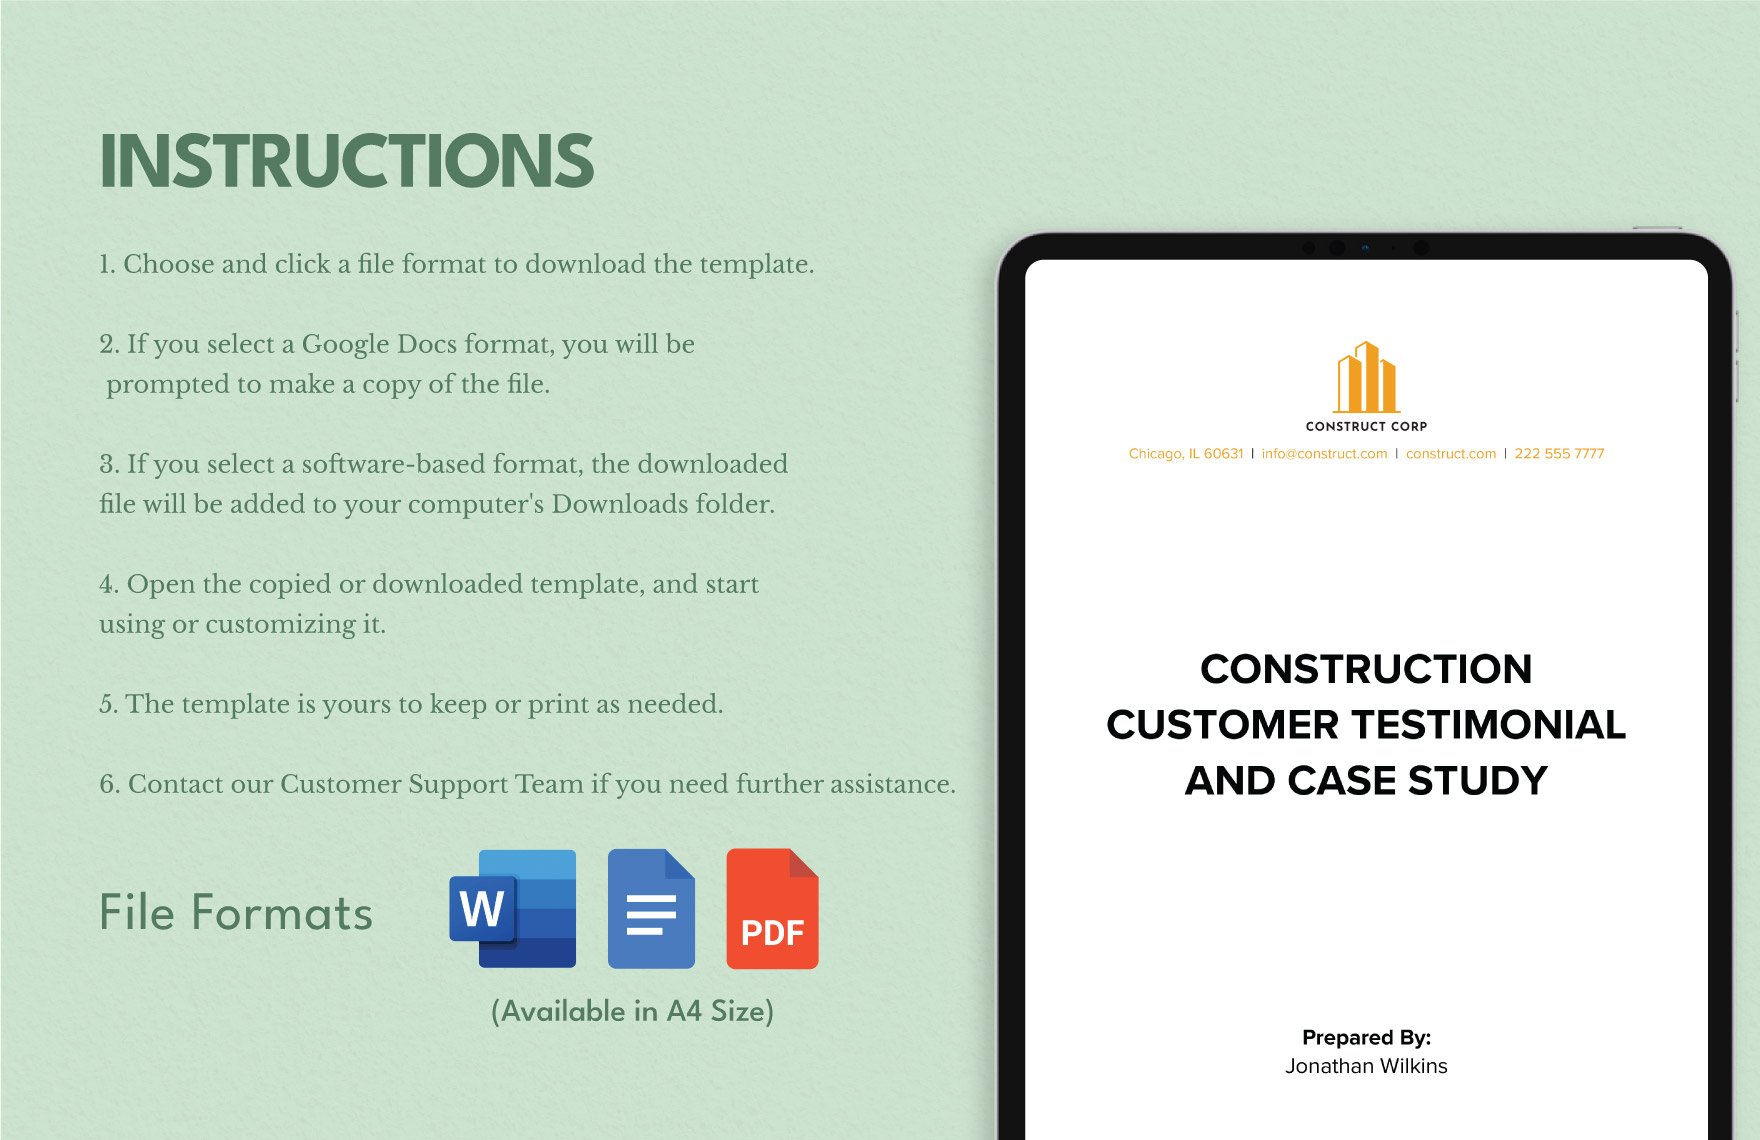 Construction Customer Testimonial and Case Study Template